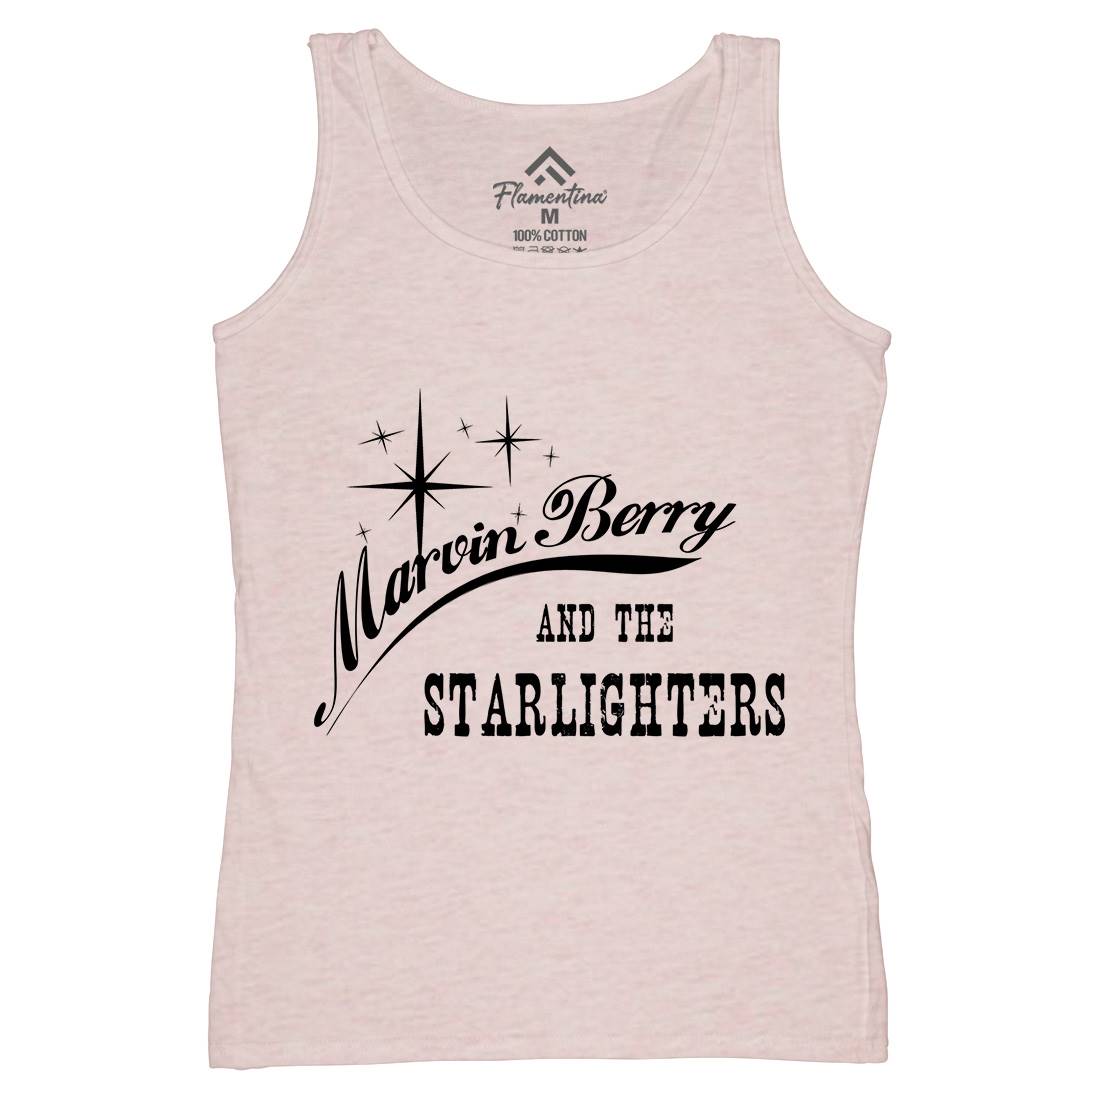 Marvin Berry And The Starlighters Womens Organic Tank Top Vest Music D152